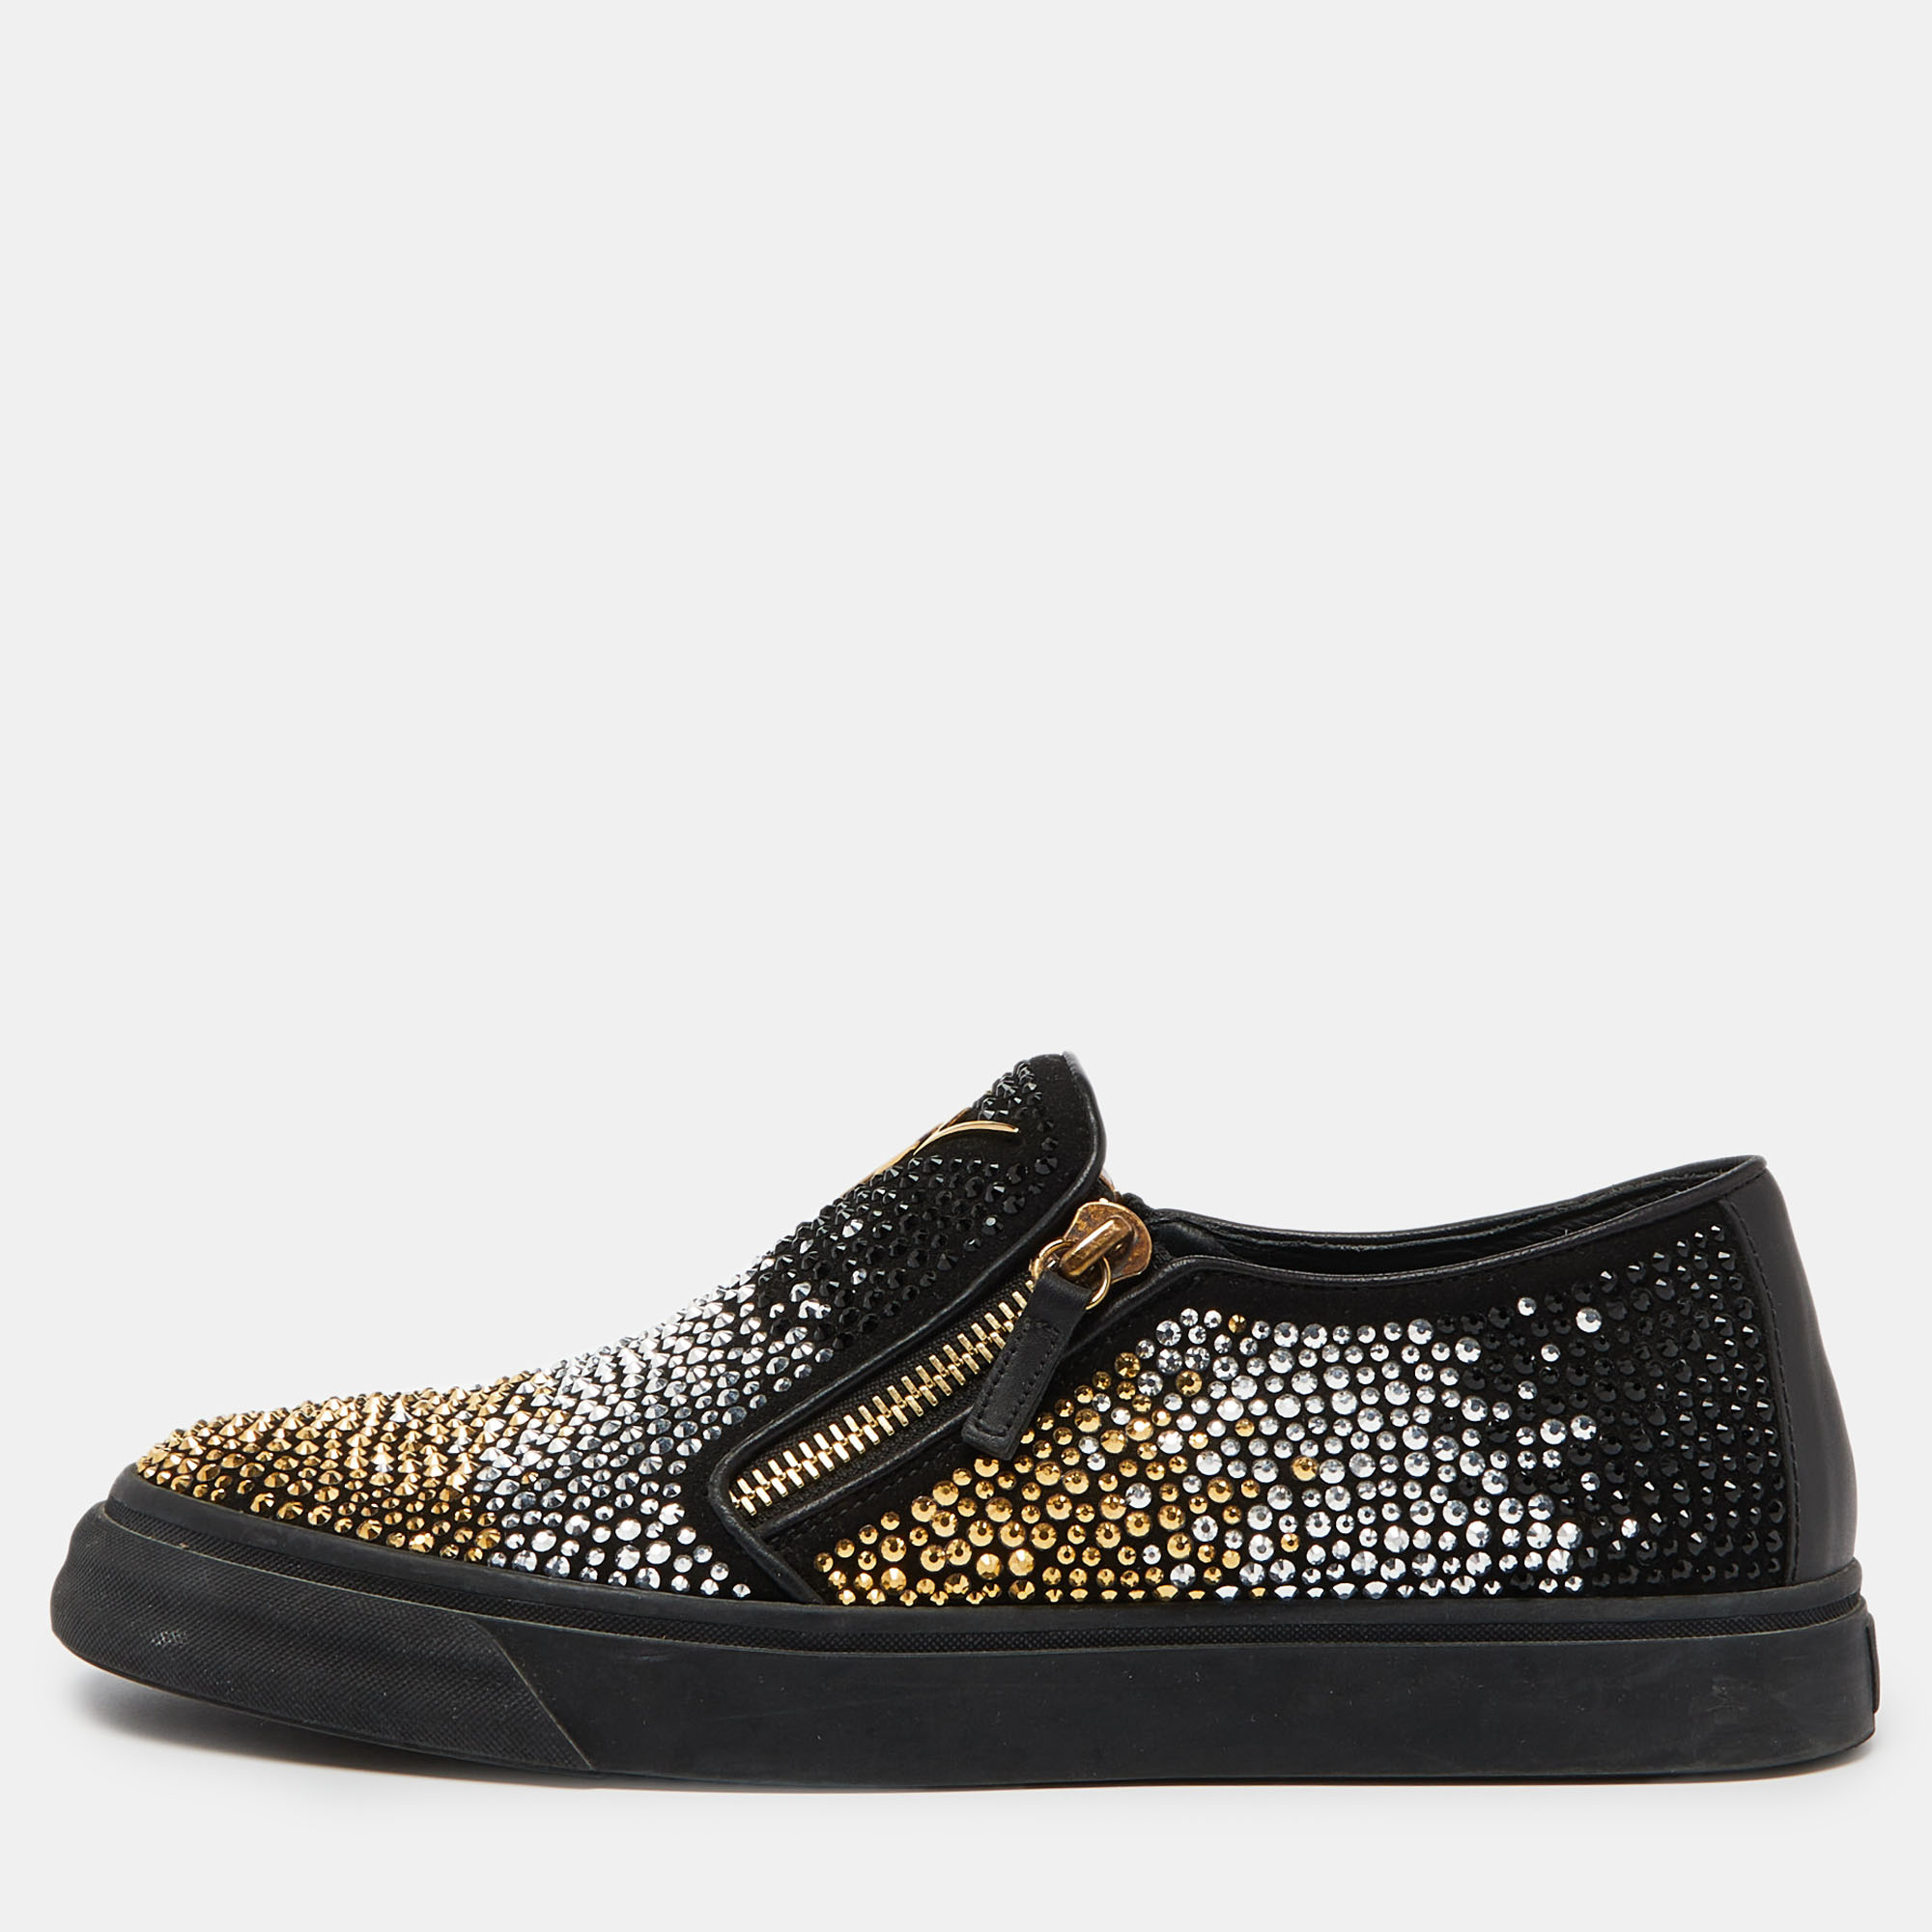 Giuseppe zanotti black suede and leather crystal embellished eve slip on sneakers size 43